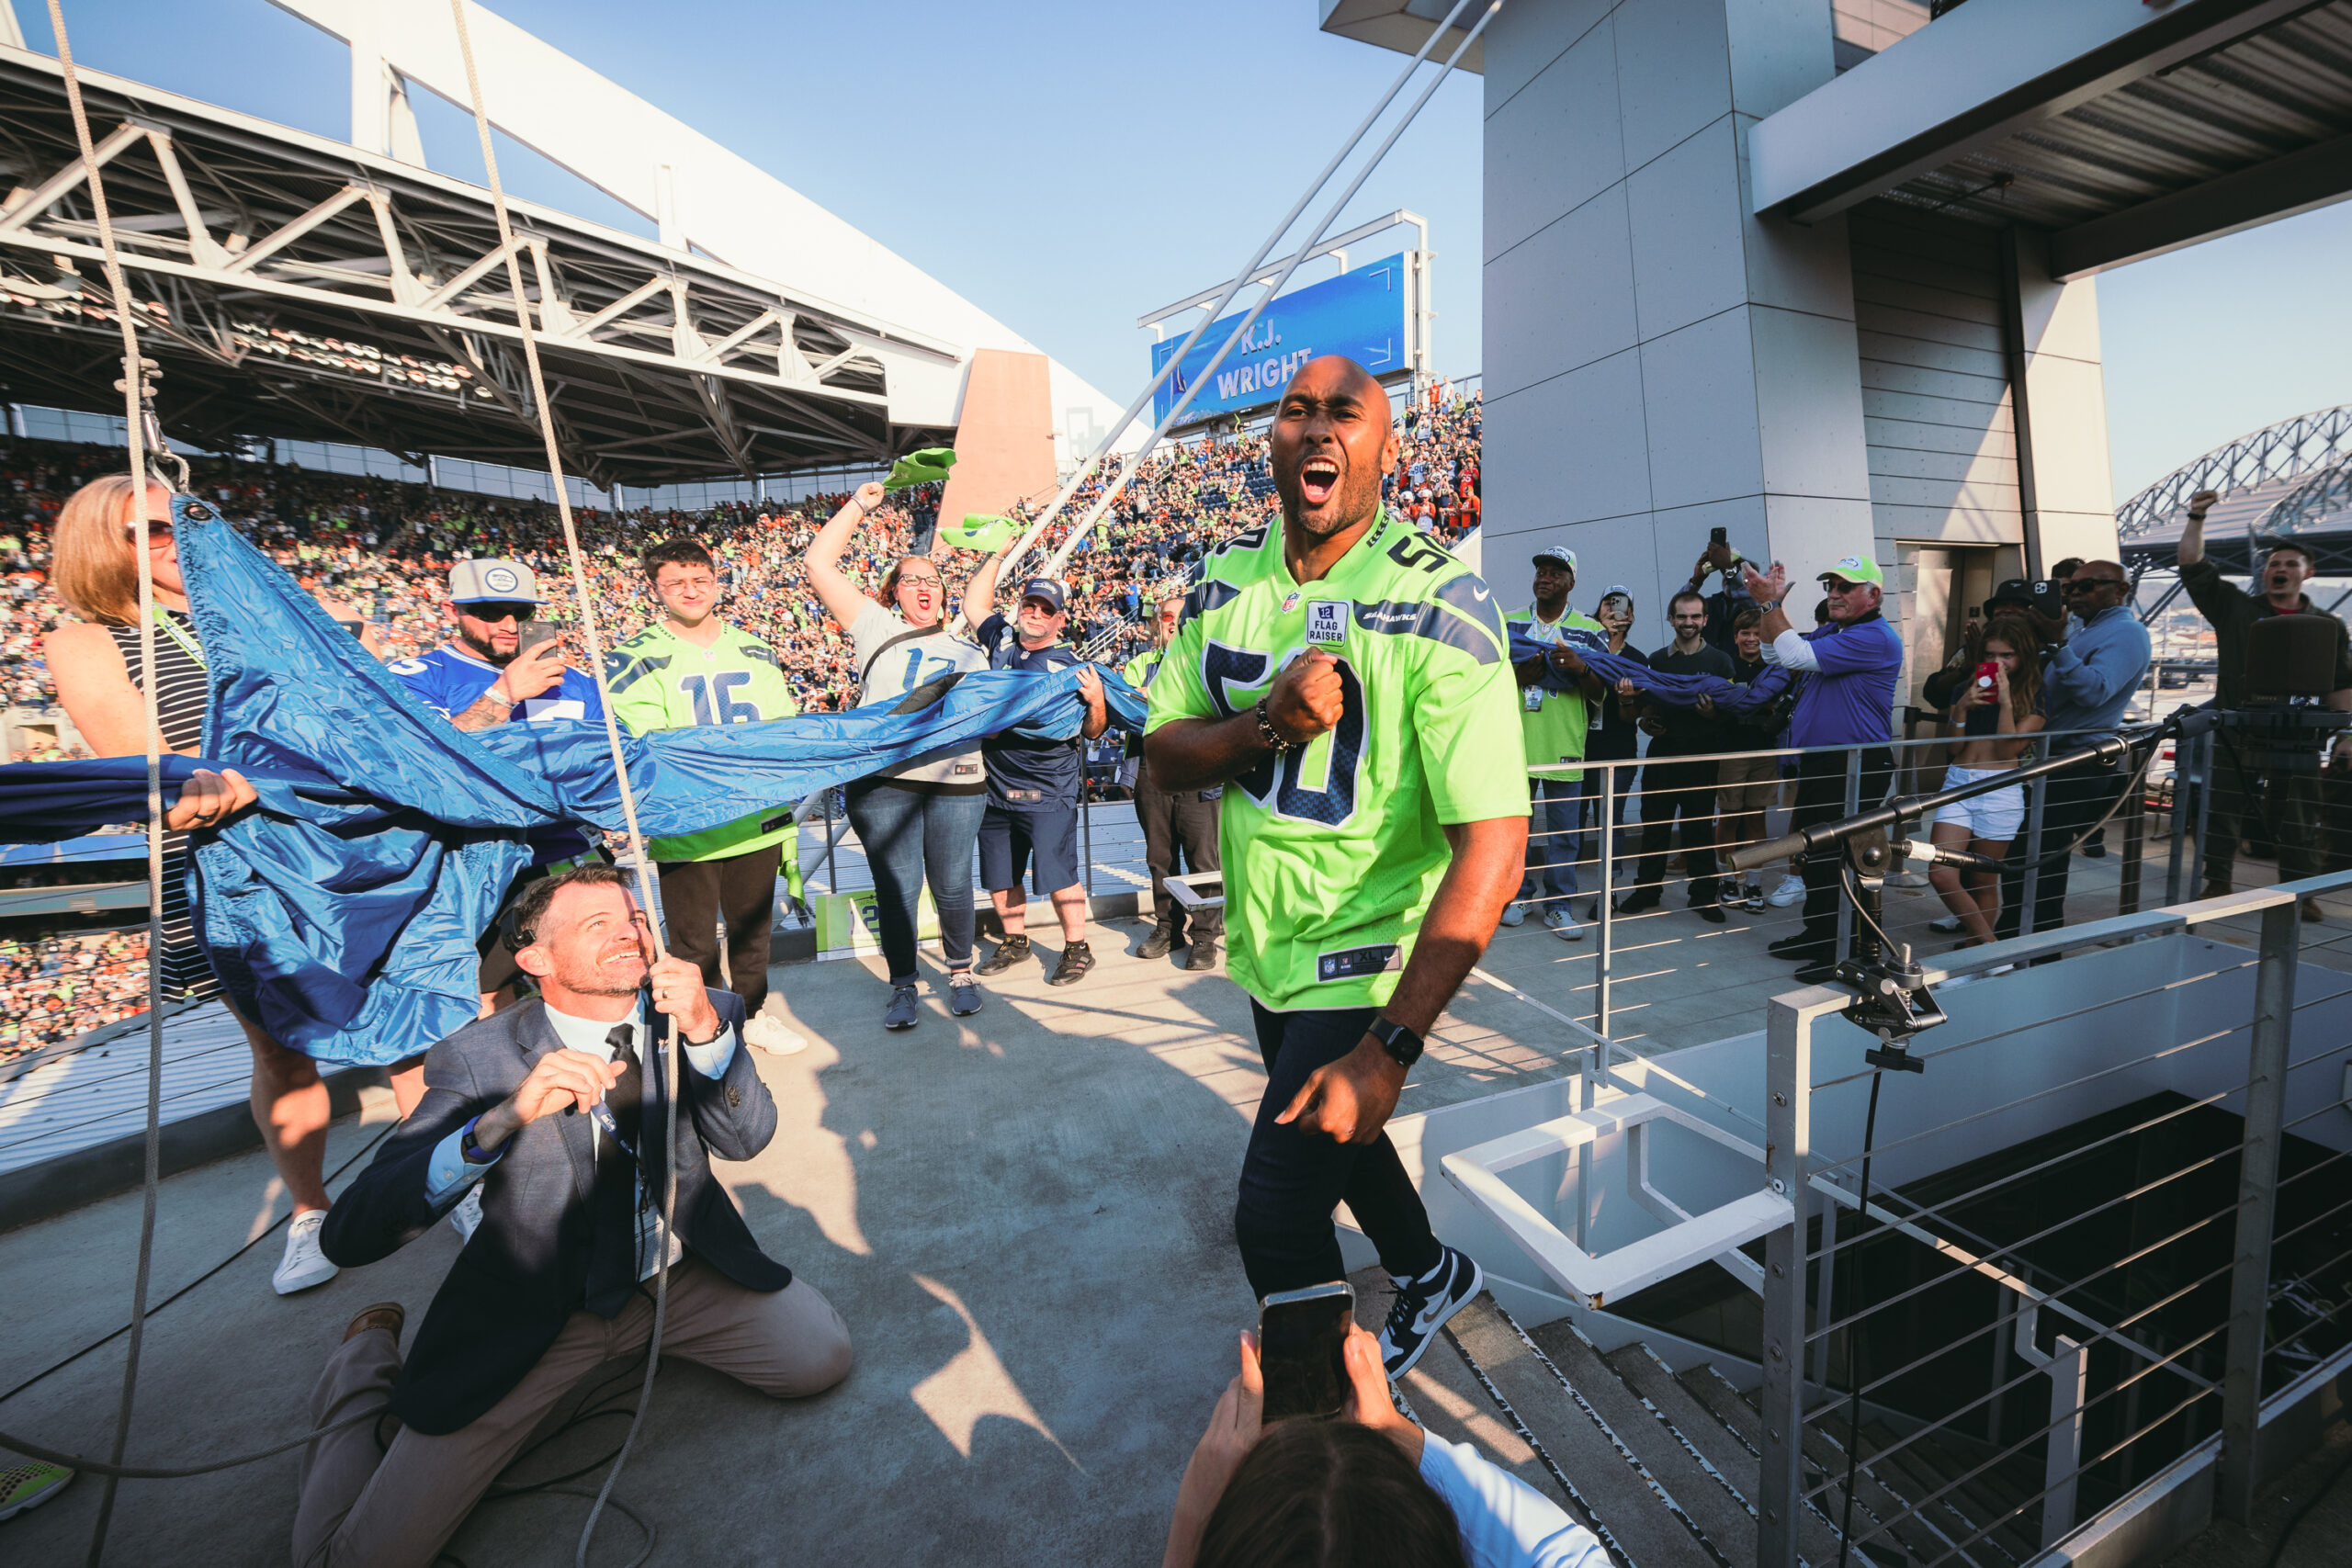 A man at Seattle's Lumen Field prepares to raise a blue flag with a white "12," a crowd is gathered behind him.